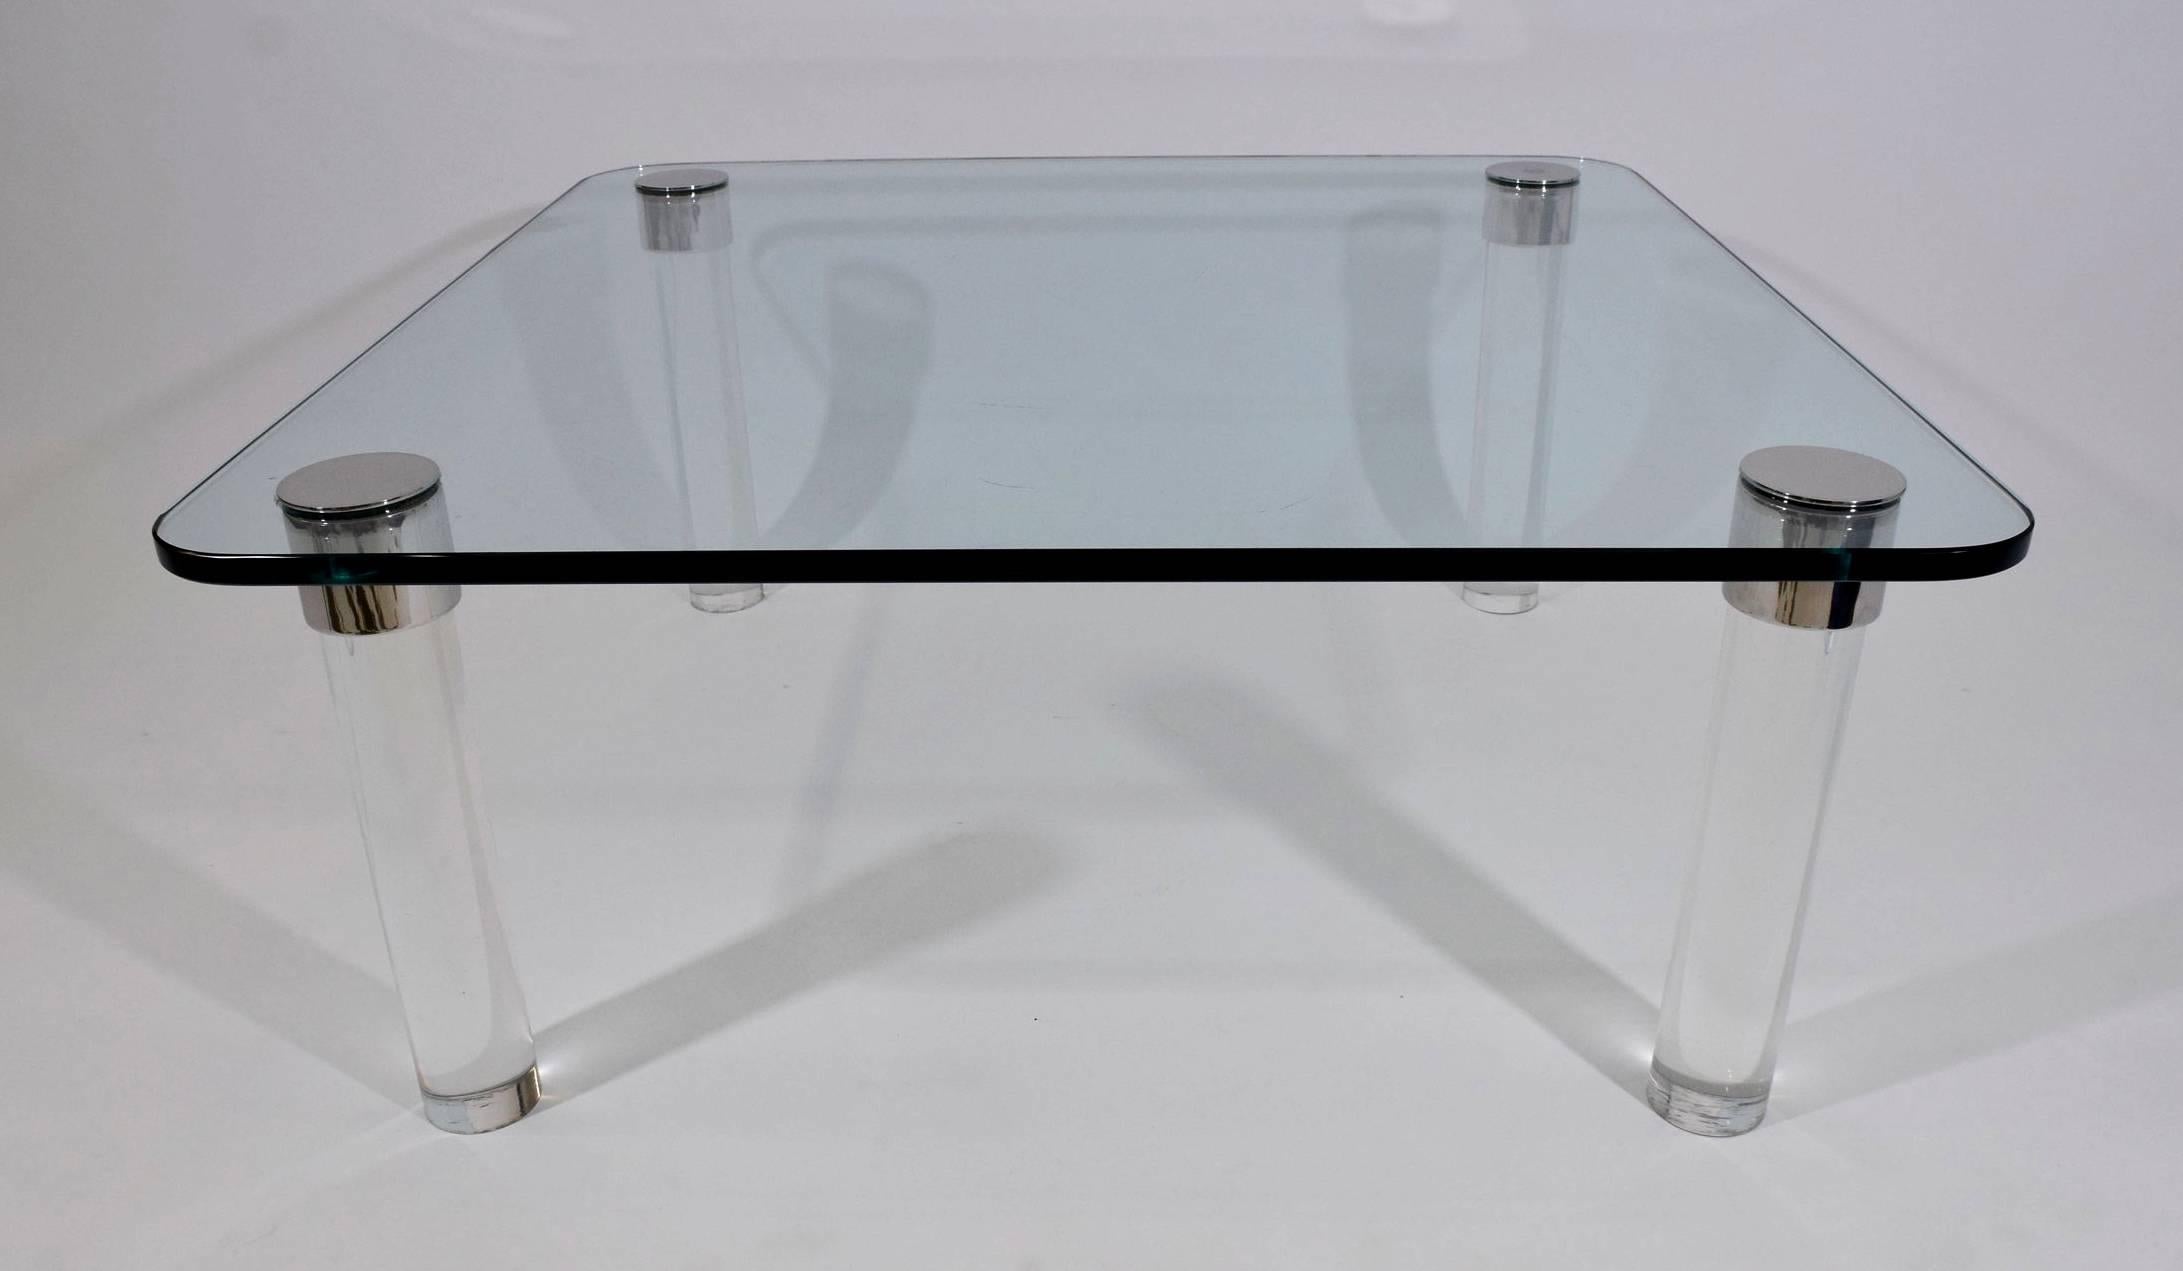 Beautiful pace coffee table with chrome trim and Lucite legs. Glass is 3/4